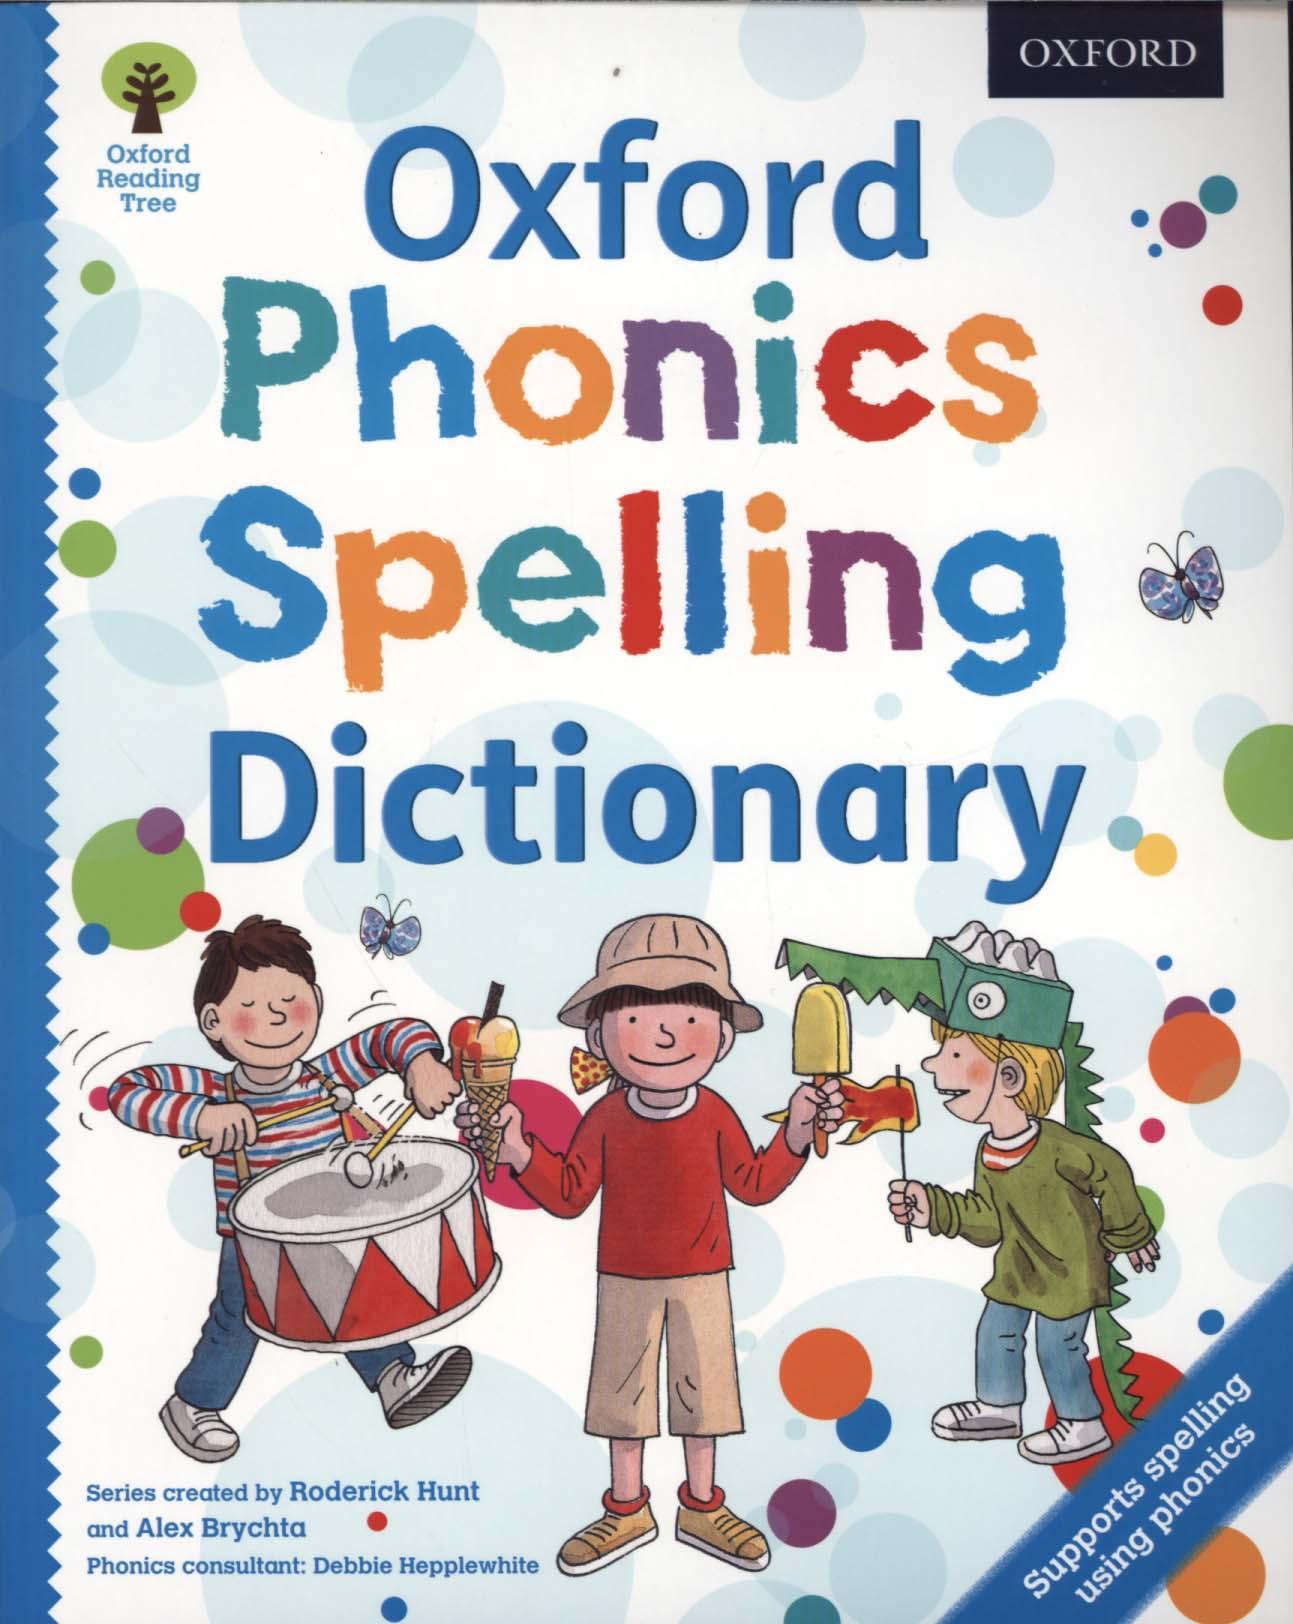 Oxford Phonics Spelling Dictionary